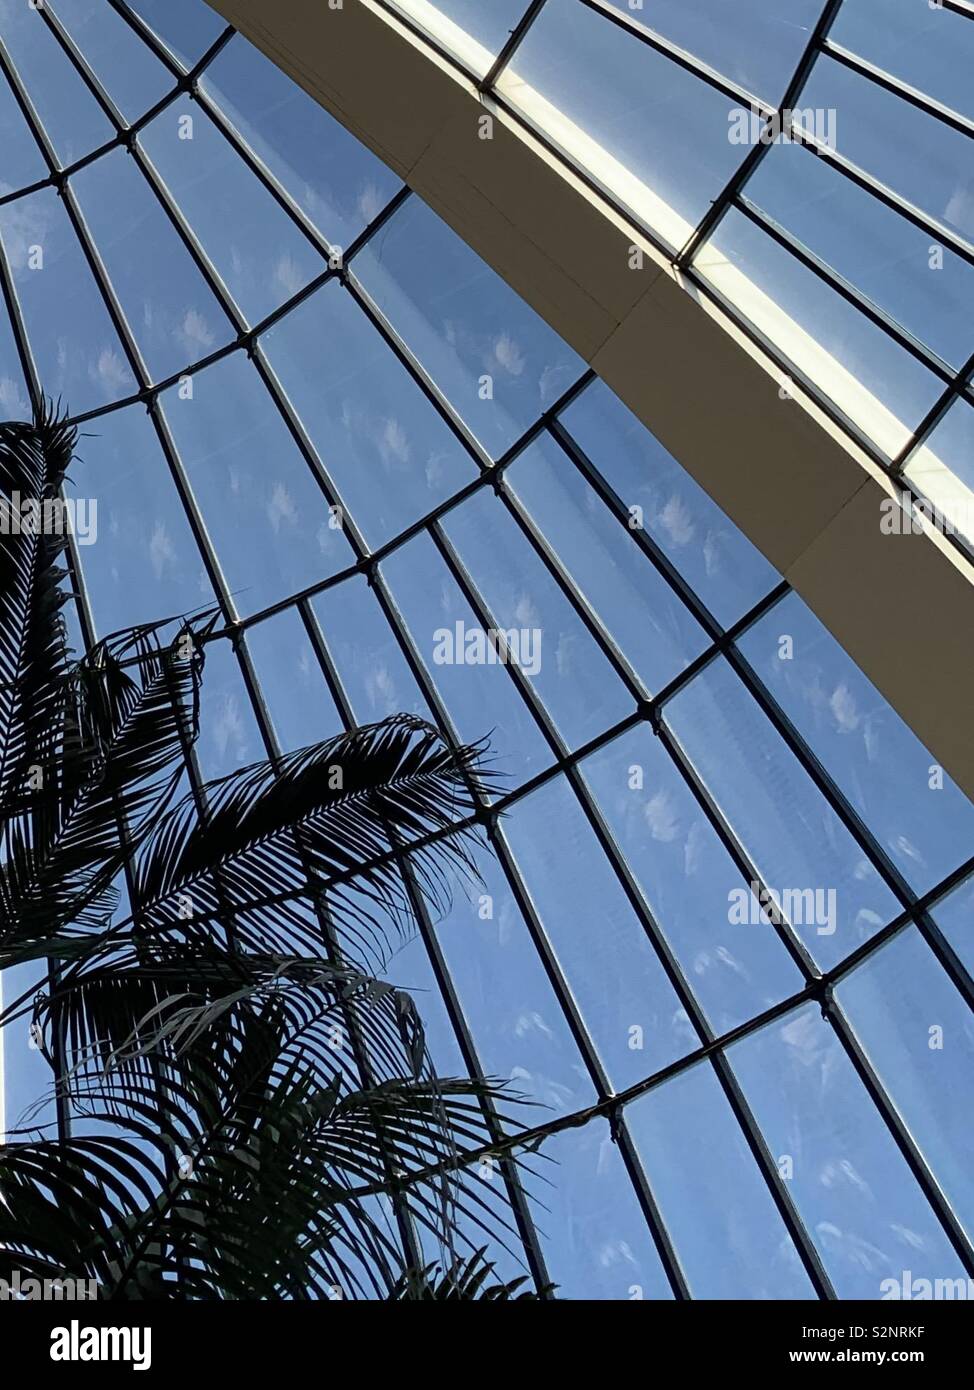 Glass dome roof with palm silhouette tree, abstract Stock Photo